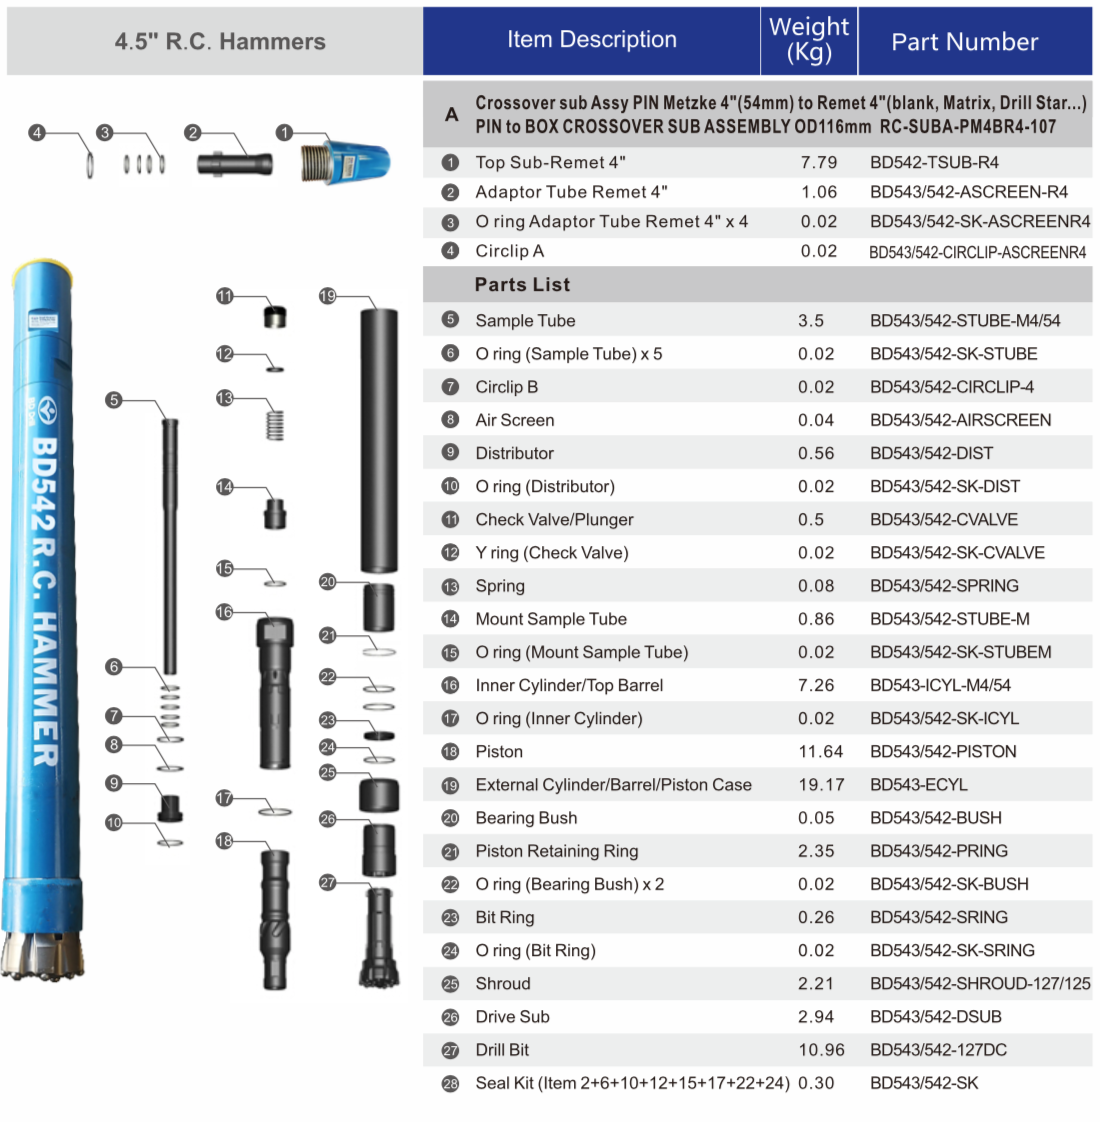 BD542 RC Hammer specifications and parts list